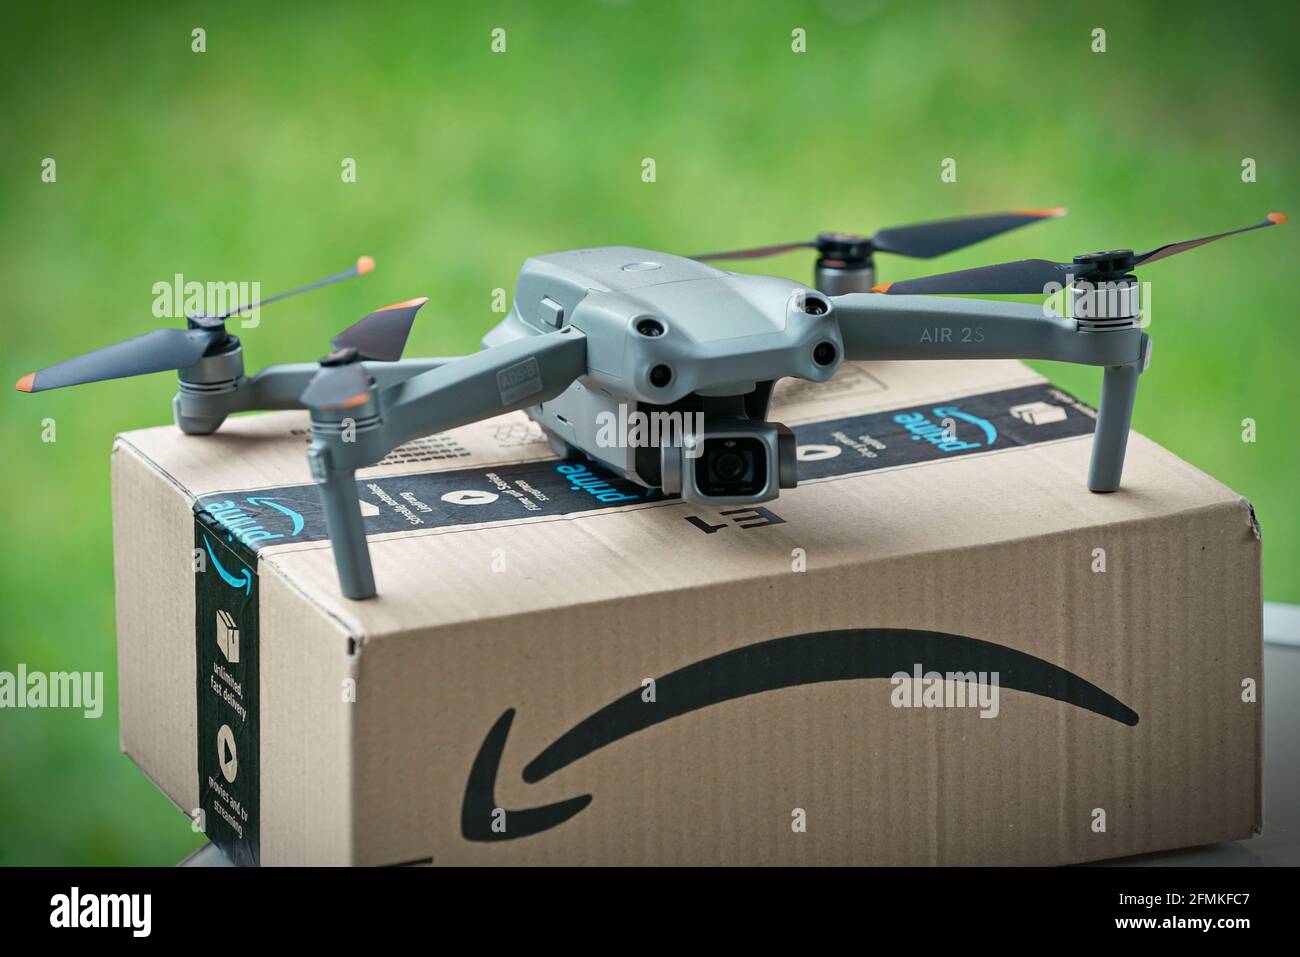 Selective focus on drone delivering parcel with amazon logo on cardboard. Milan, Italy - May 2021 Stock Photo